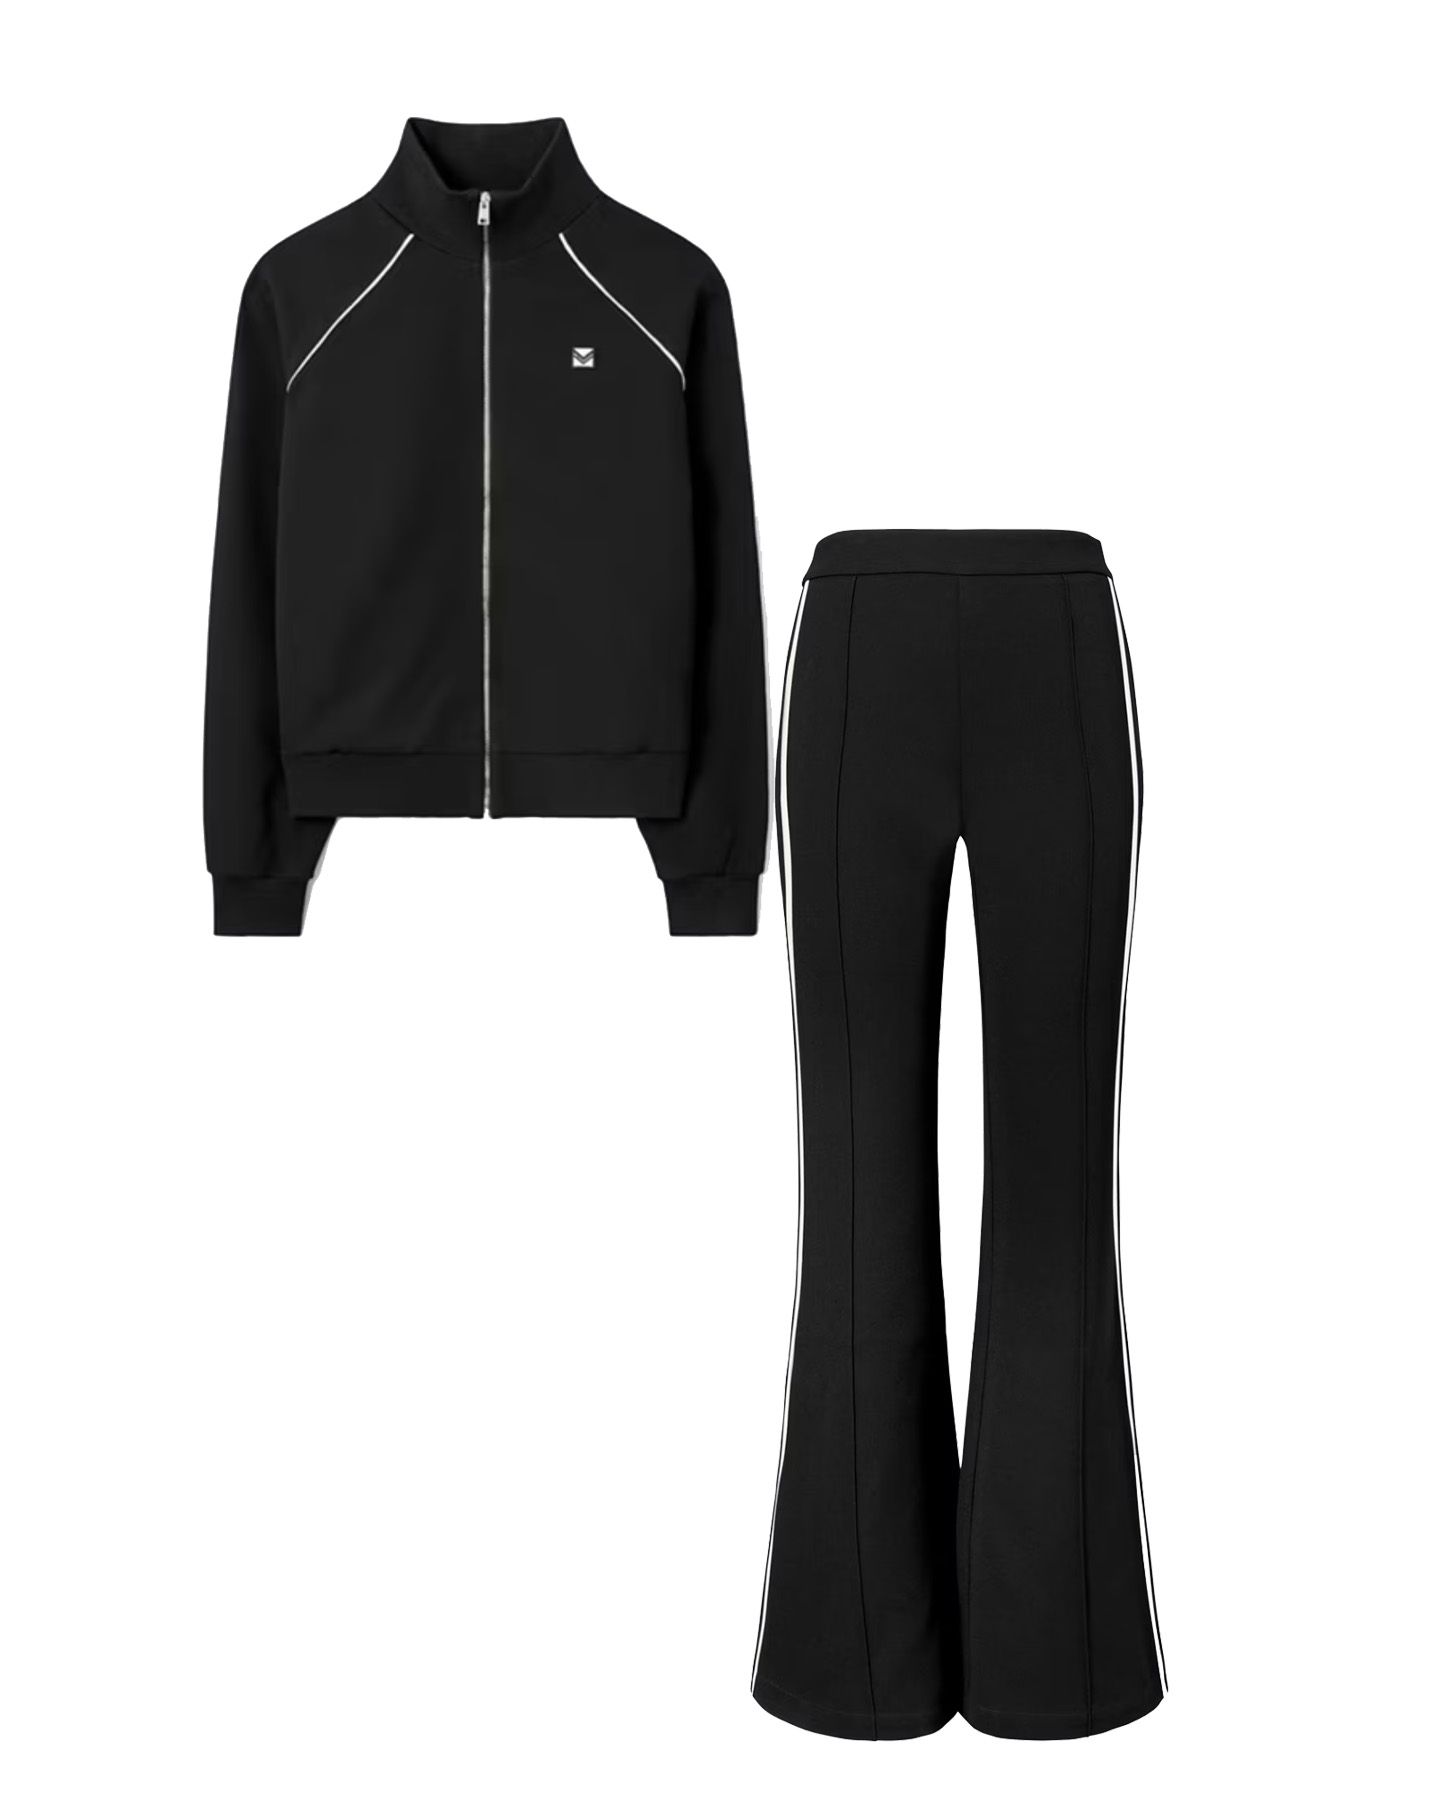 FUROR Women's Tracksuits: Look and Feel Your Best